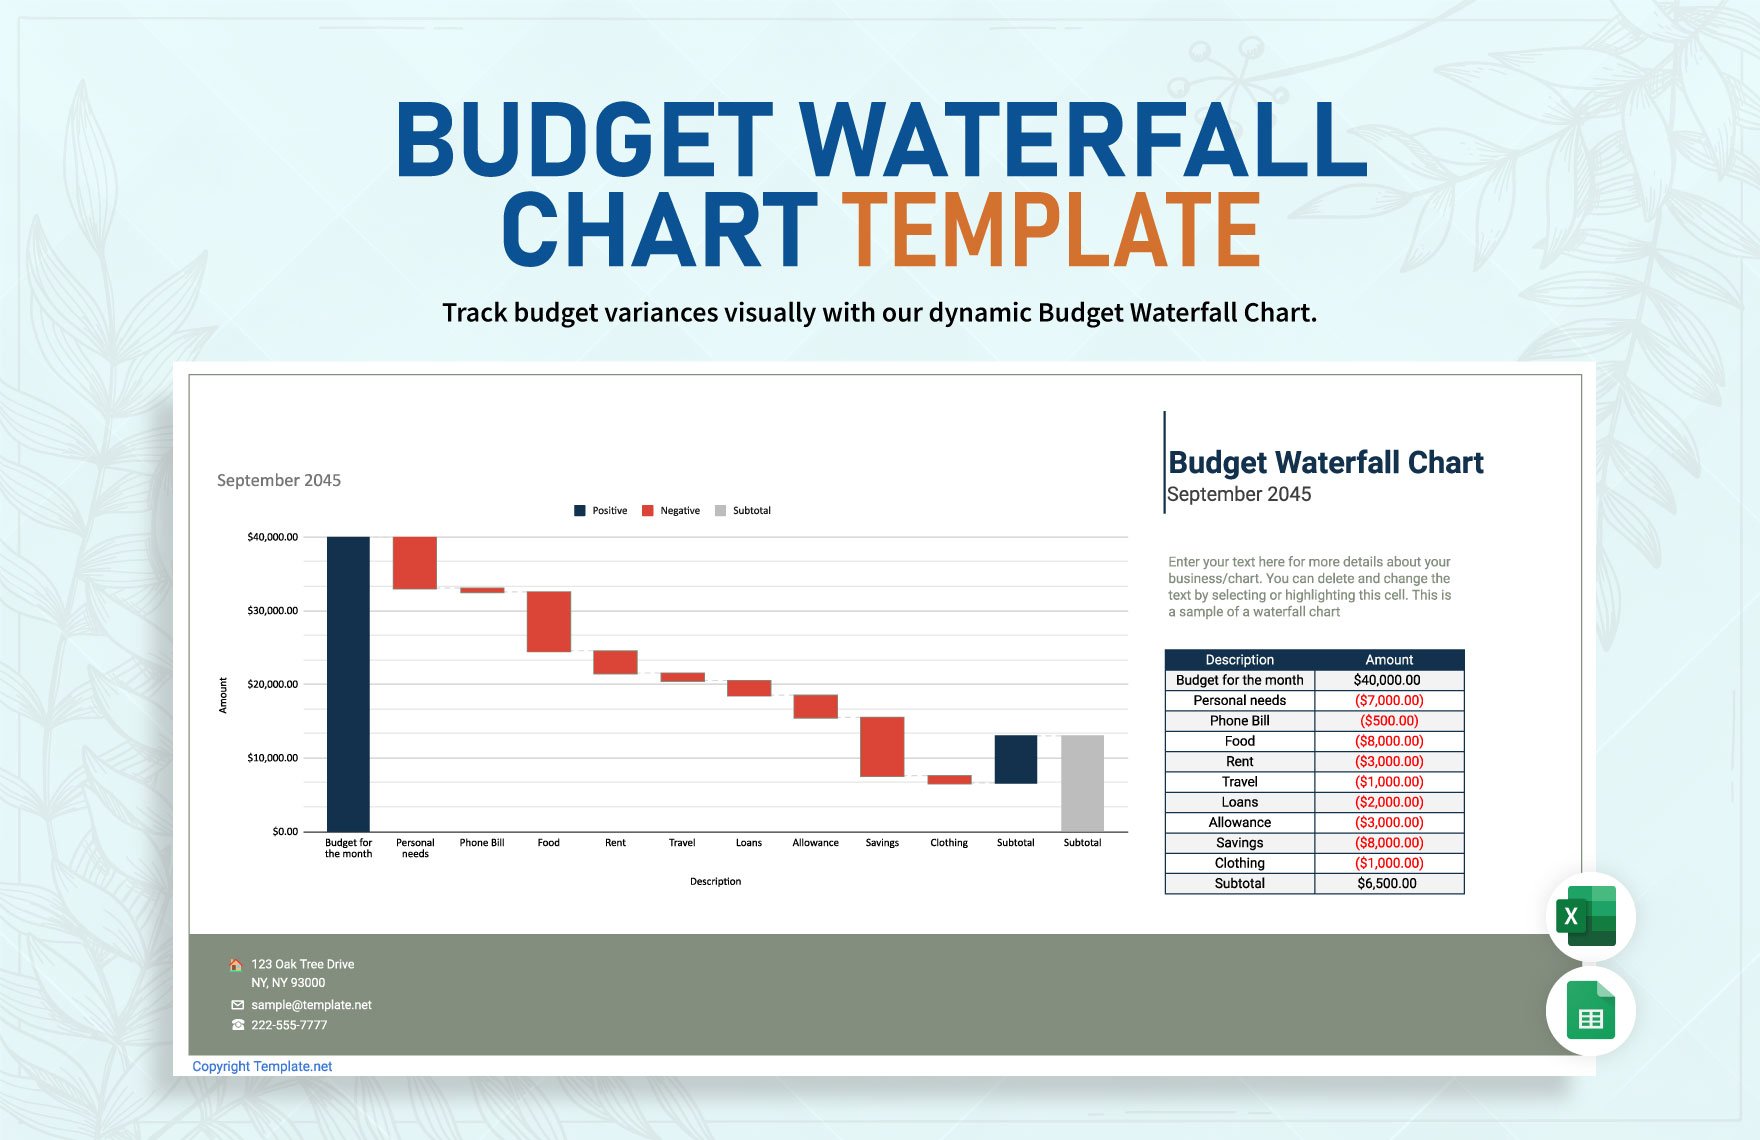 Budget Waterfall Chart in Excel, Google Sheets